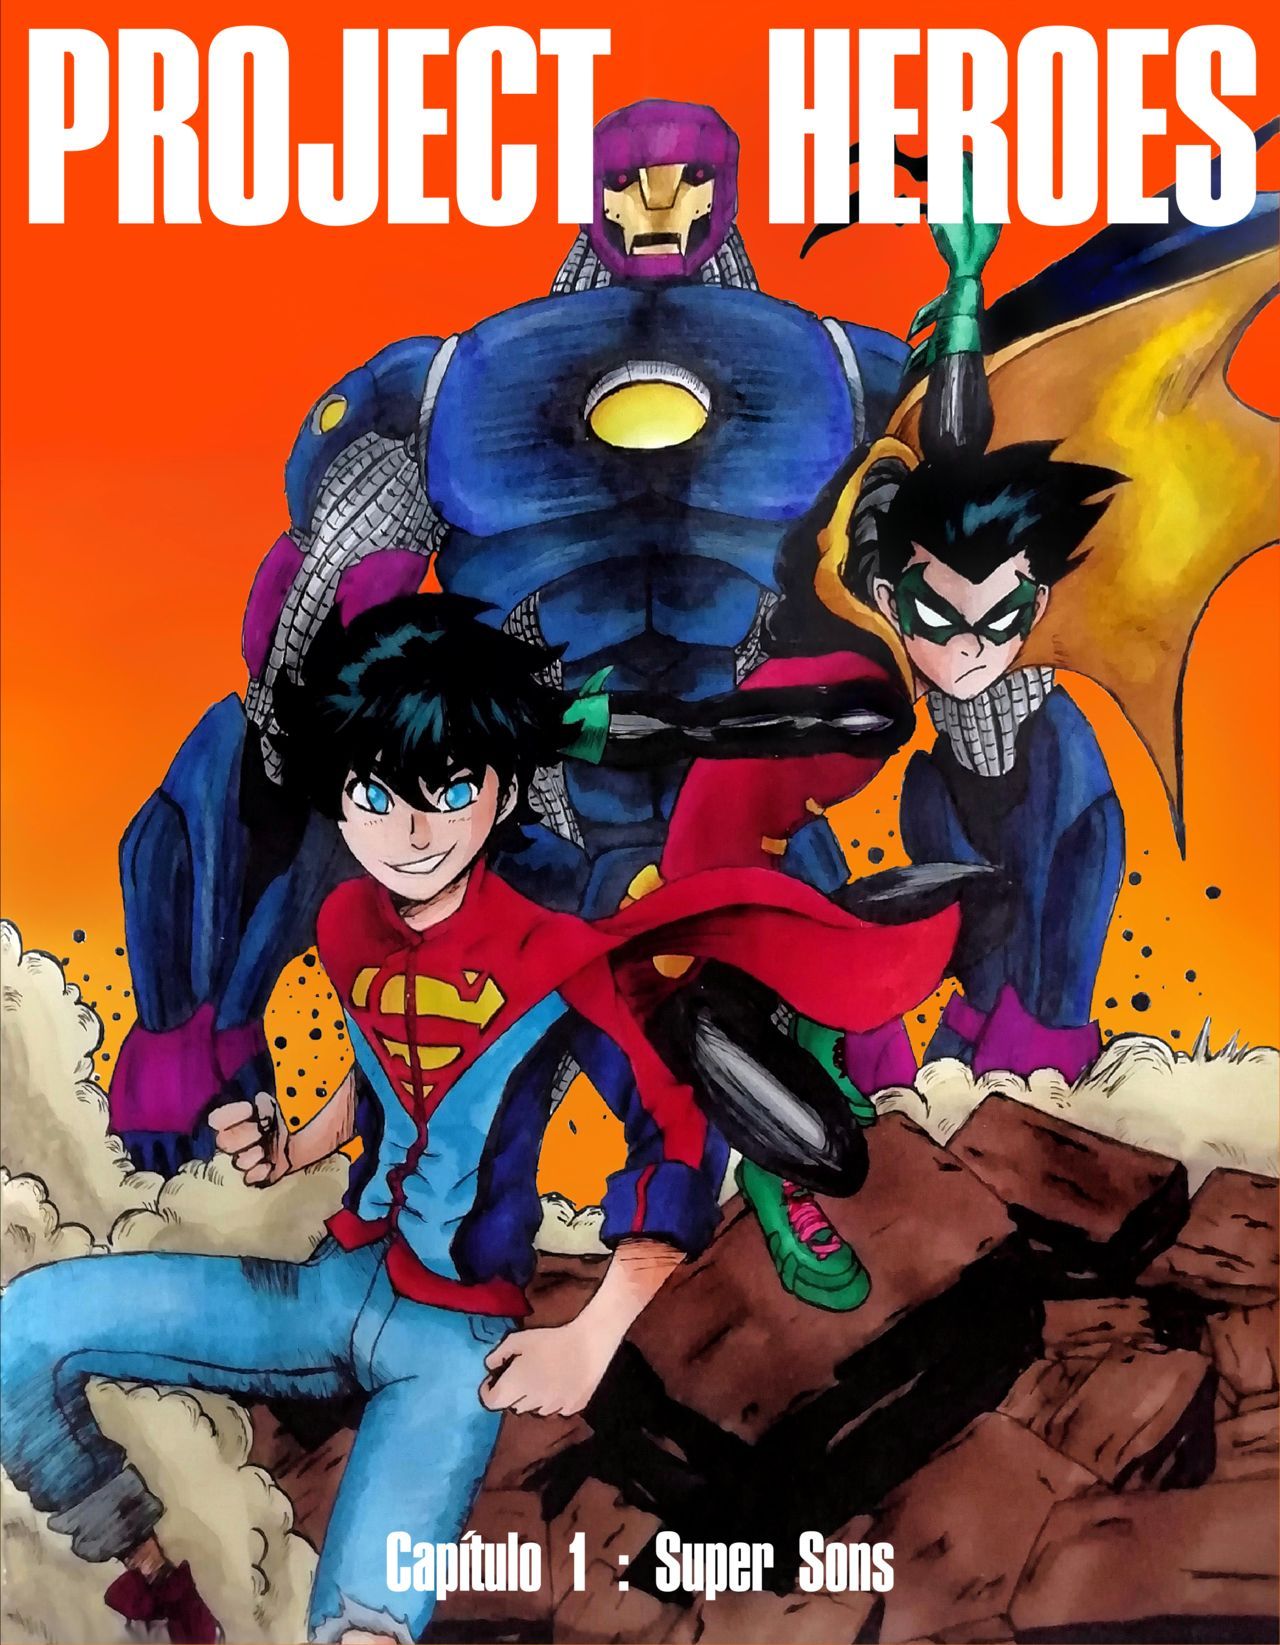 project heroes Chapter 1: Super Sons (Ongoing) 1